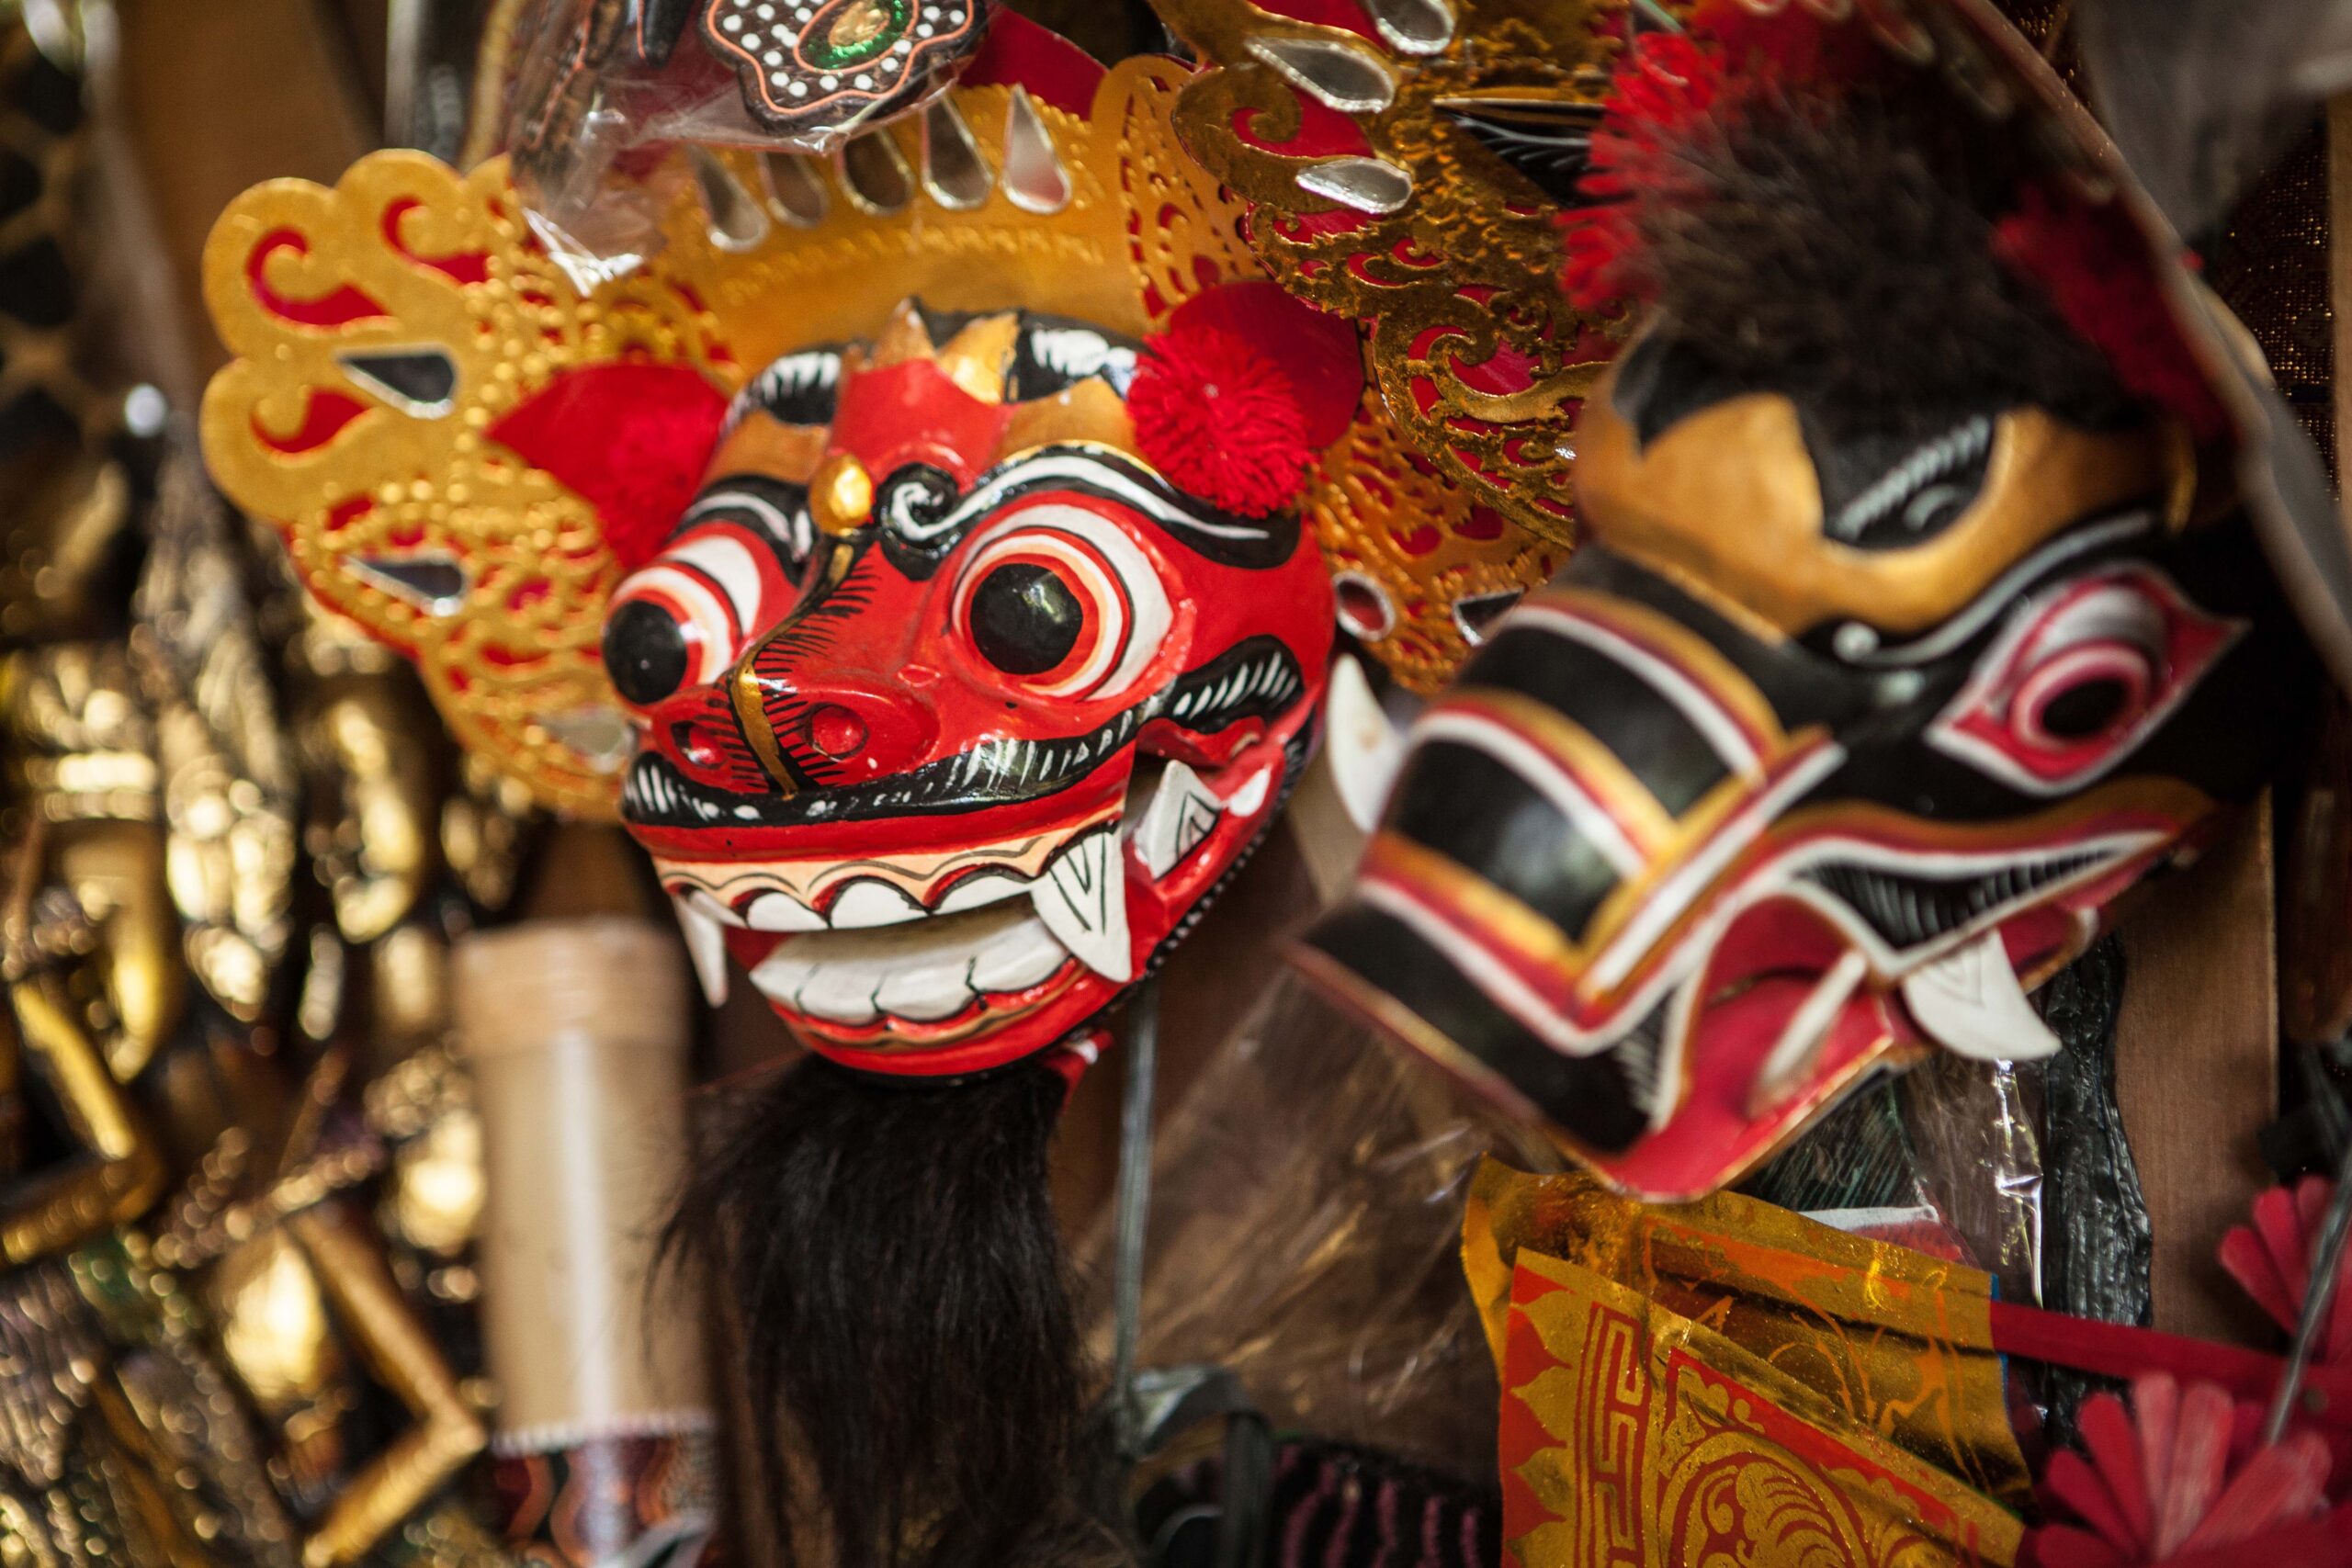 A red and black Barong mask, a mythical creature in Indonesian culture considered a guardian of the village.